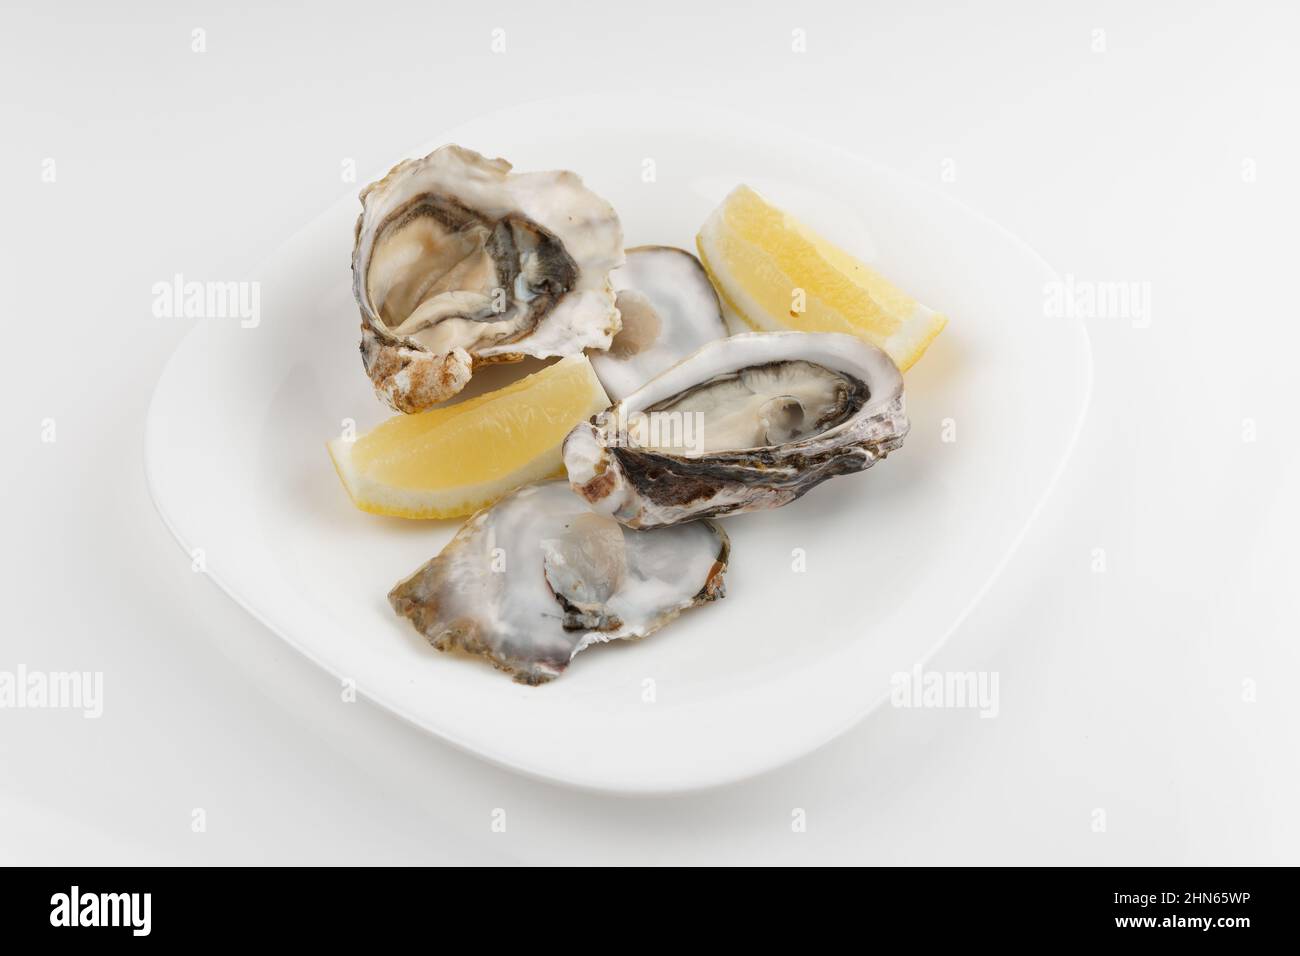 Oysters in plate on light grey background Stock Photo